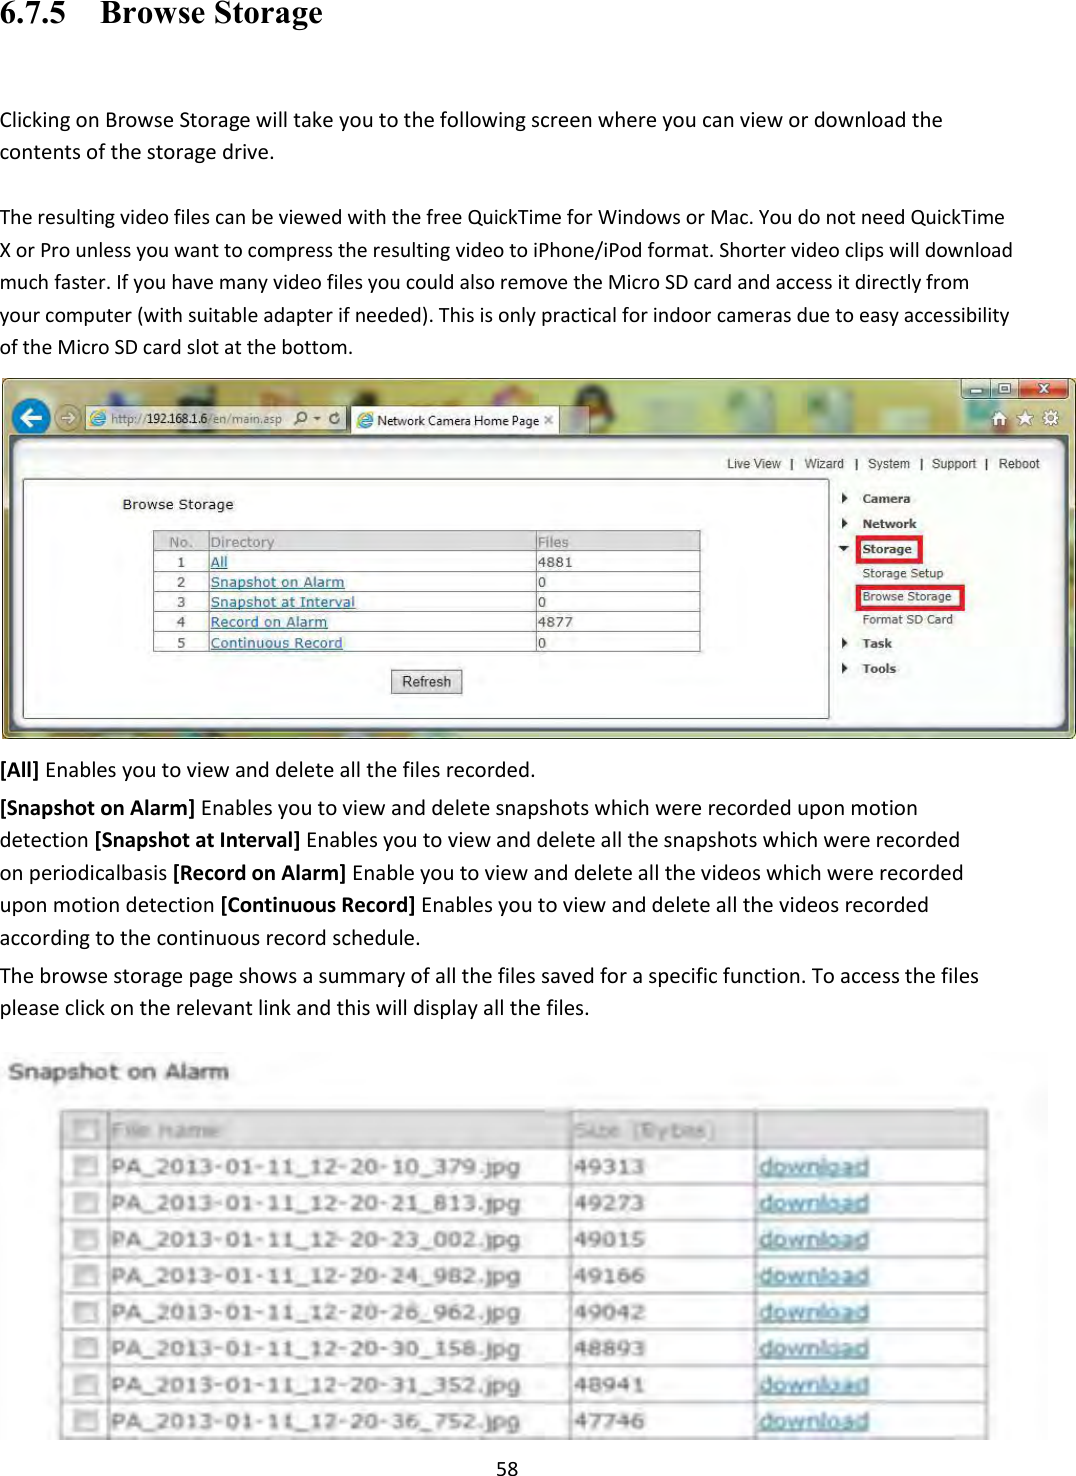    58 6.7.5    Browse Storage  Clicking on Browse Storage will take you to the following screen where you can view or download the contents of the storage drive.  The resulting video files can be viewed with the free QuickTime for Windows or Mac. You do not need QuickTime X or Pro unless you want to compress the resulting video to iPhone/iPod format. Shorter video clips will download much faster. If you have many video files you could also remove the Micro SD card and access it directly from your computer (with suitable adapter if needed). This is only practical for indoor cameras due to easy accessibility of the Micro SD card slot at the bottom.  [All] Enables you to view and delete all the files recorded.  [Snapshot on Alarm] Enables you to view and delete snapshots which were recorded upon motion detection [Snapshot at Interval] Enables you to view and delete all the snapshots which were recorded on periodicalbasis [Record on Alarm] Enable you to view and delete all the videos which were recorded upon motion detection [Continuous Record] Enables you to view and delete all the videos recorded according to the continuous record schedule.  The browse storage page shows a summary of all the files saved for a specific function. To access the files please click on the relevant link and this will display all the files.                    